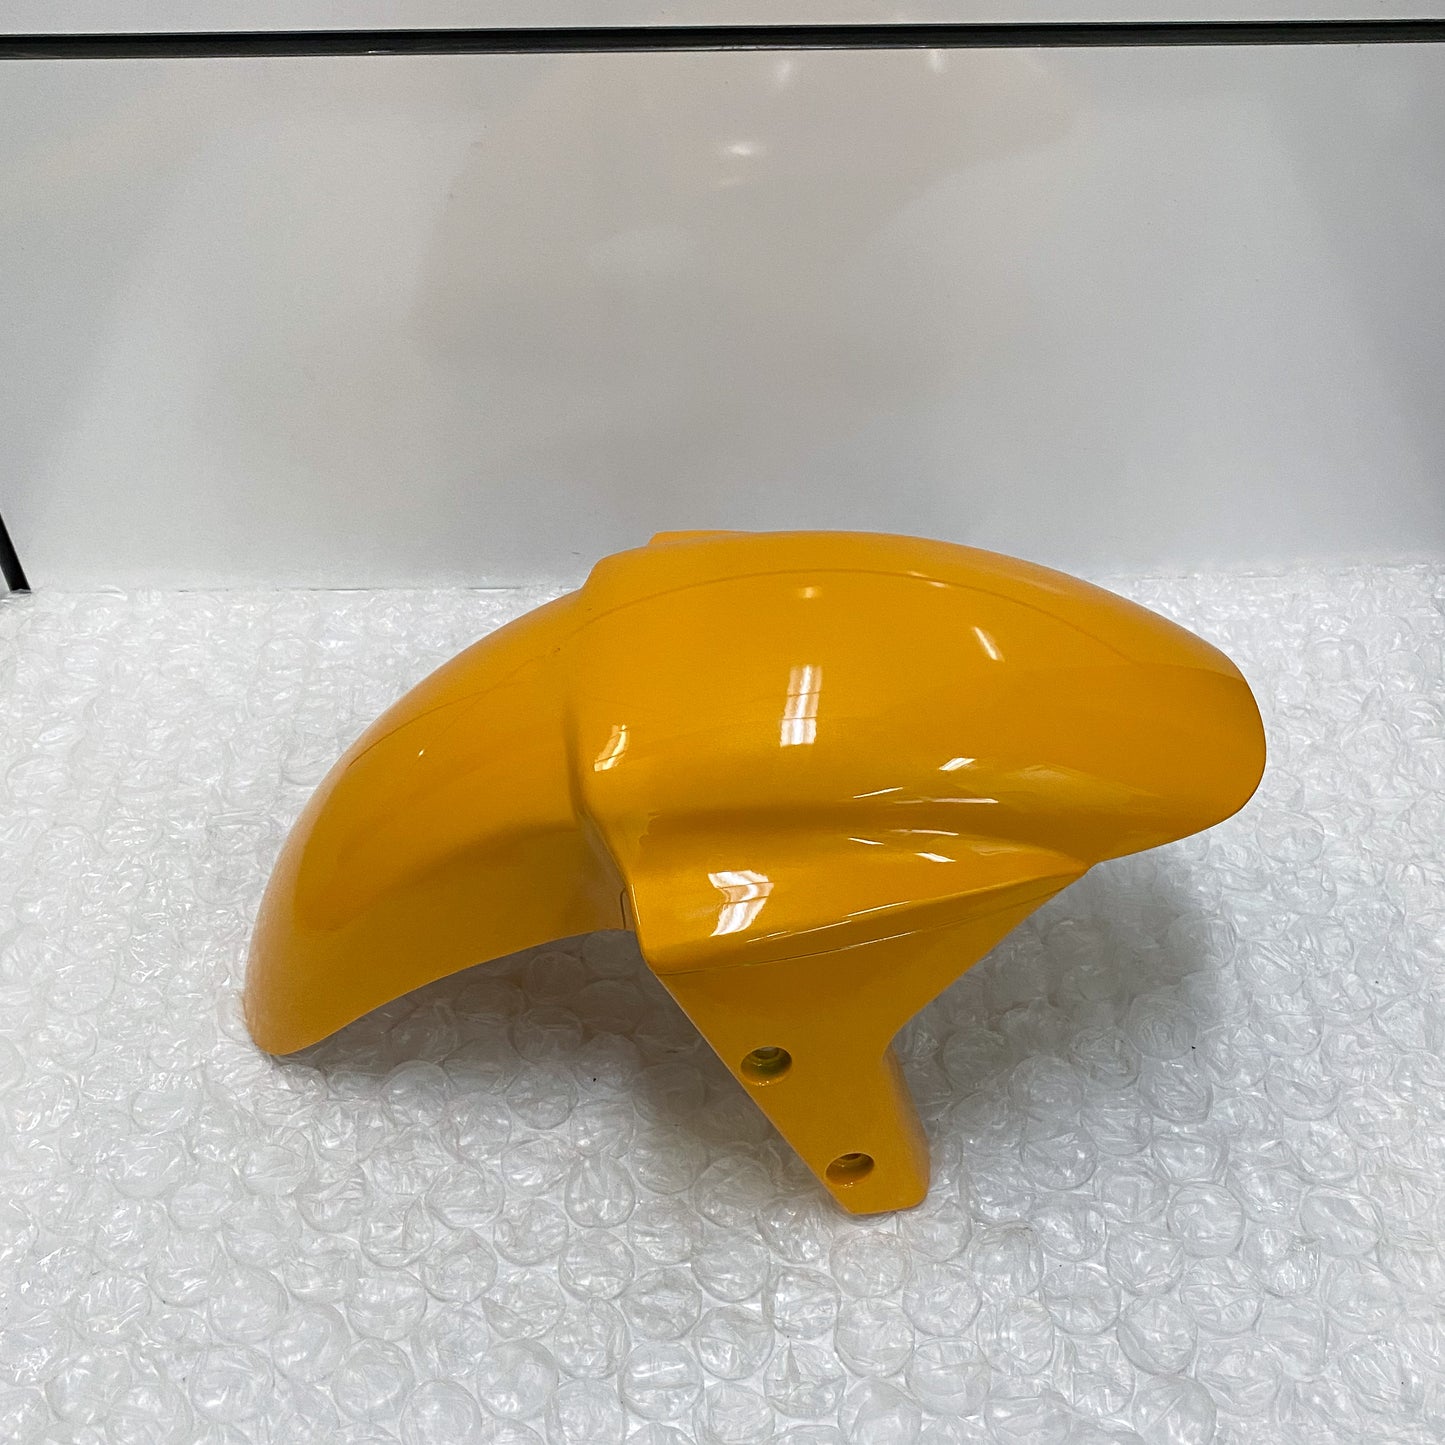 Hyosung Front Fender GT650 Yellow 53110HN91800MO USED